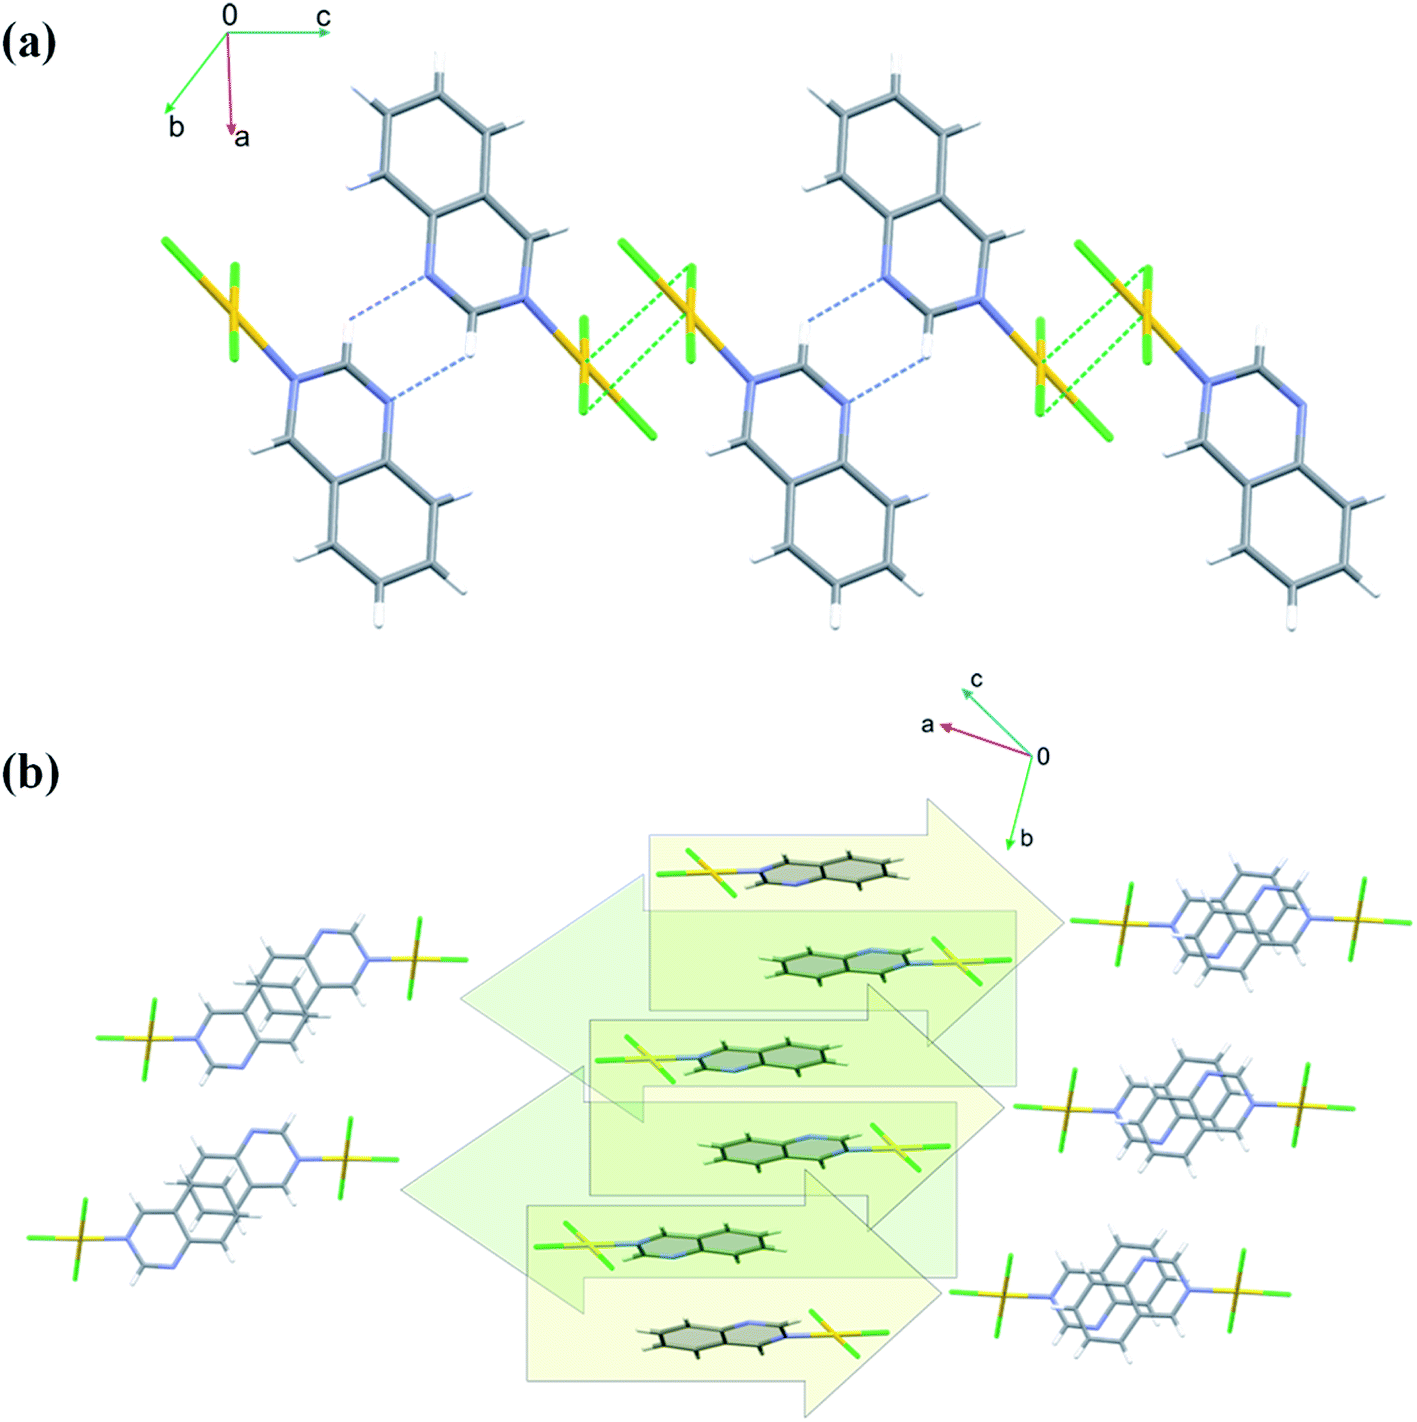 Mononuclear Gold Iii Complexes With Diazanaphthalenes The Influence Of The Position Of Nitrogen Atoms In The Aromatic Rings On The Complex Crystal Rsc Advances Rsc Publishing Doi 10 1039 D0raa